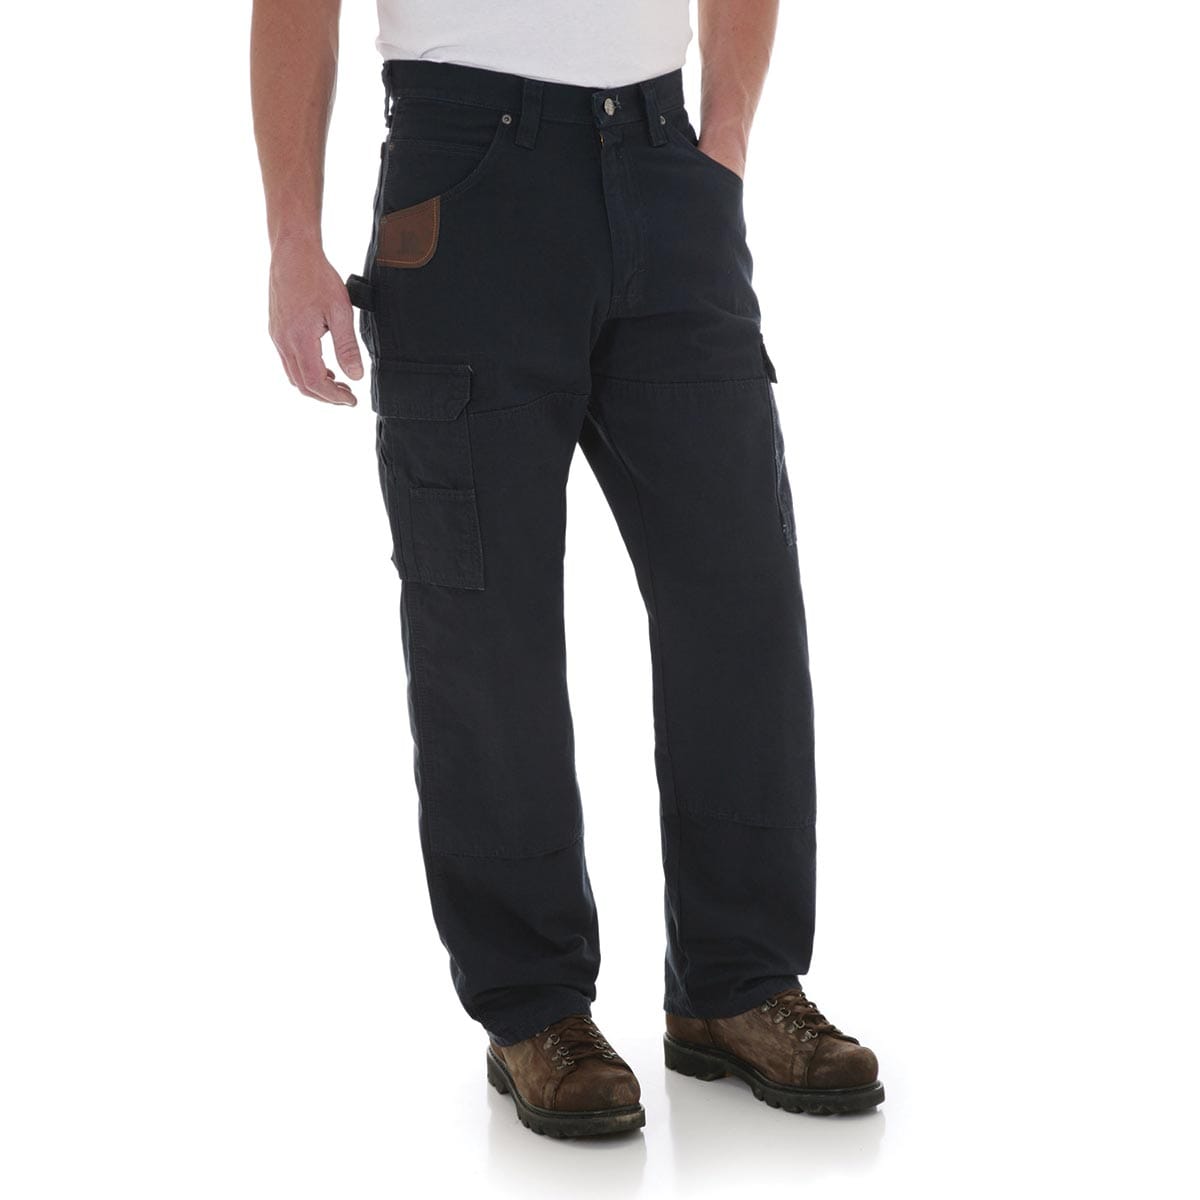 Spring Gray Cargo Pants Male All Season Fit Pant Casual Solid Color Pocket  Trouser Fashion Overalls Beach Pockets Straight - Walmart.com